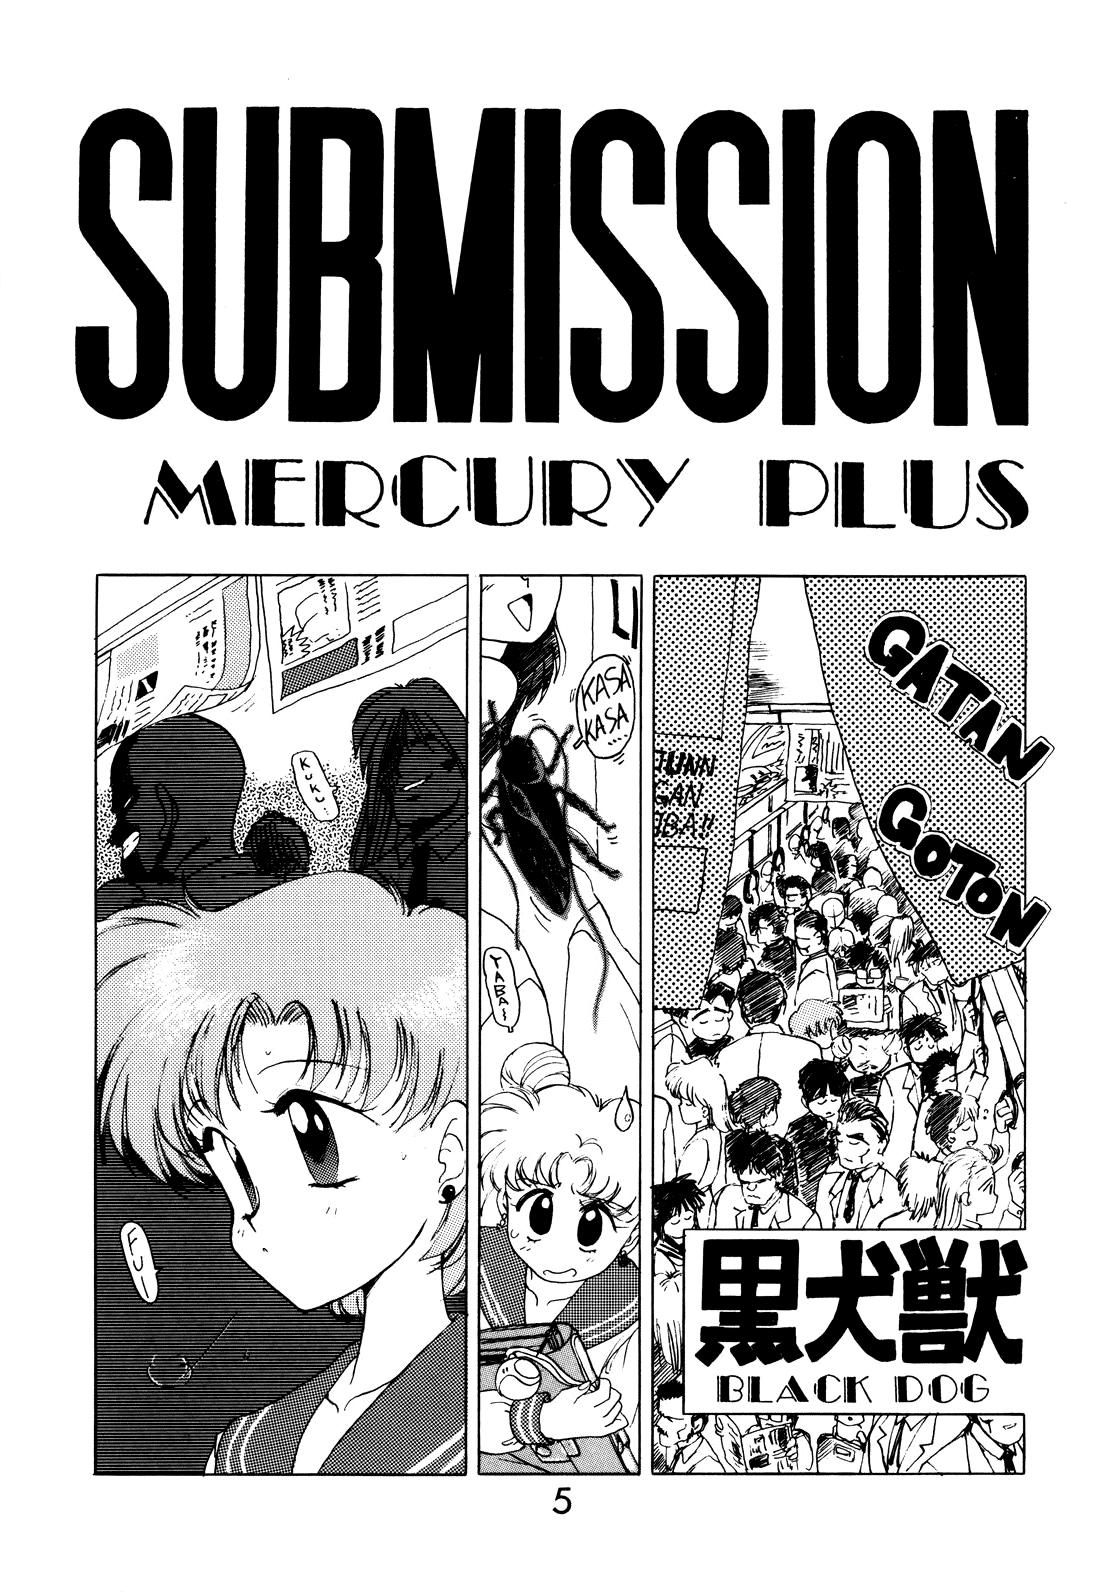 Real Submission Mercury Plus - Sailor moon Beautiful - Page 4